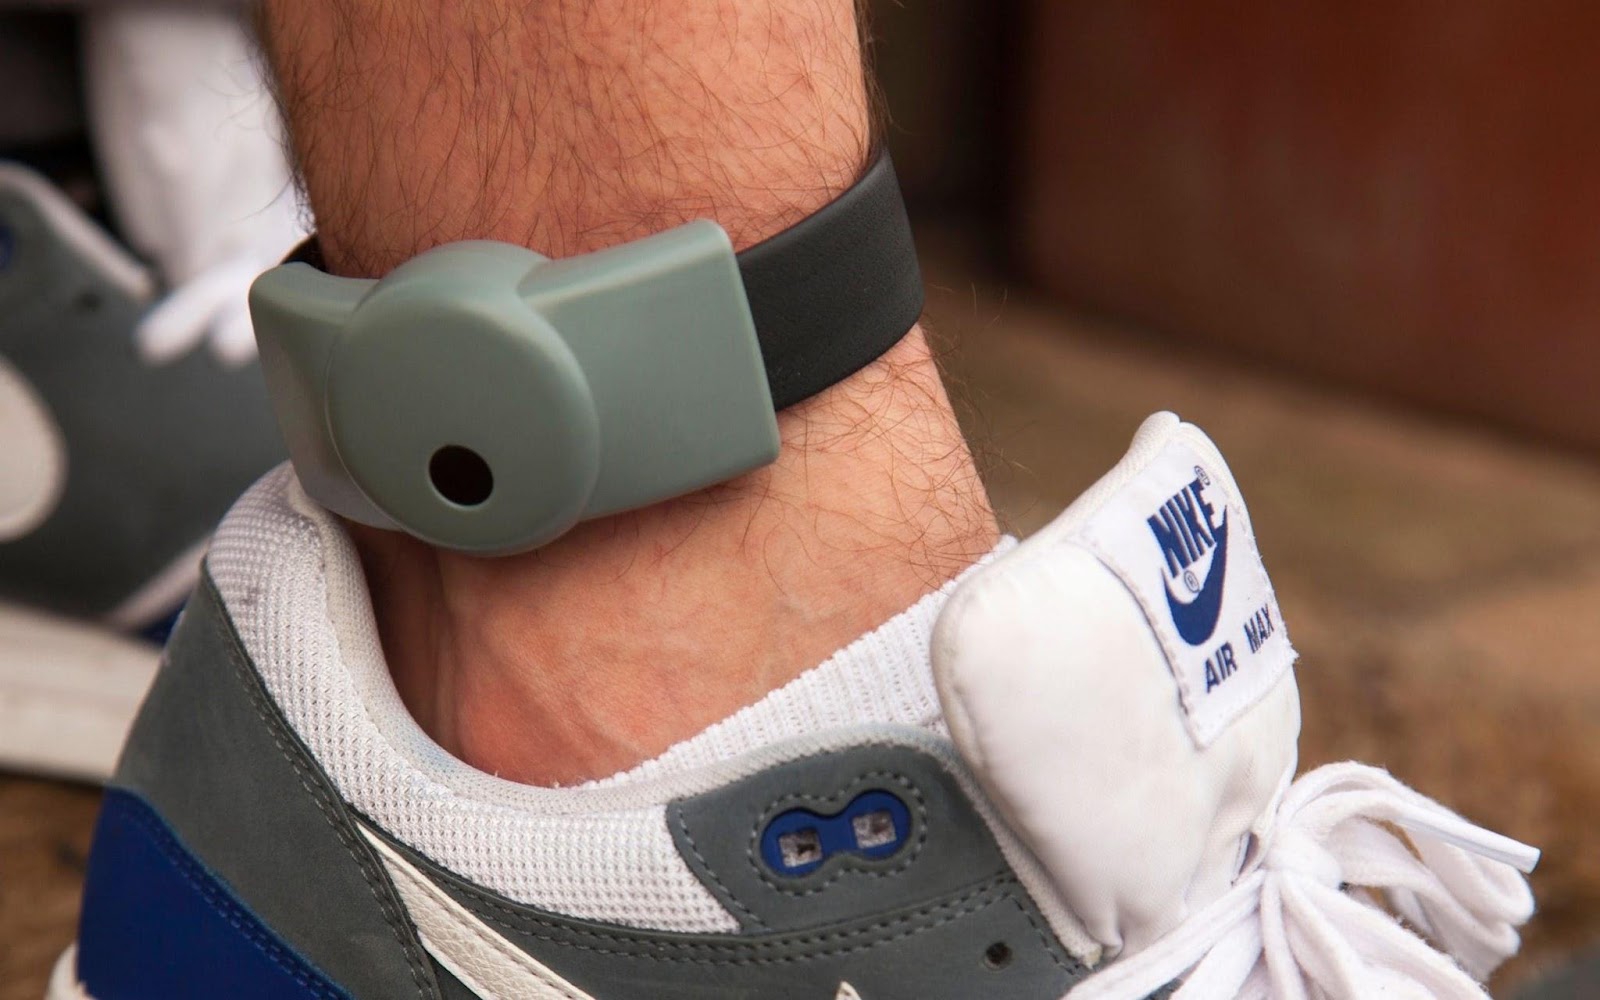 How To Trick A Gps Ankle Monitor
